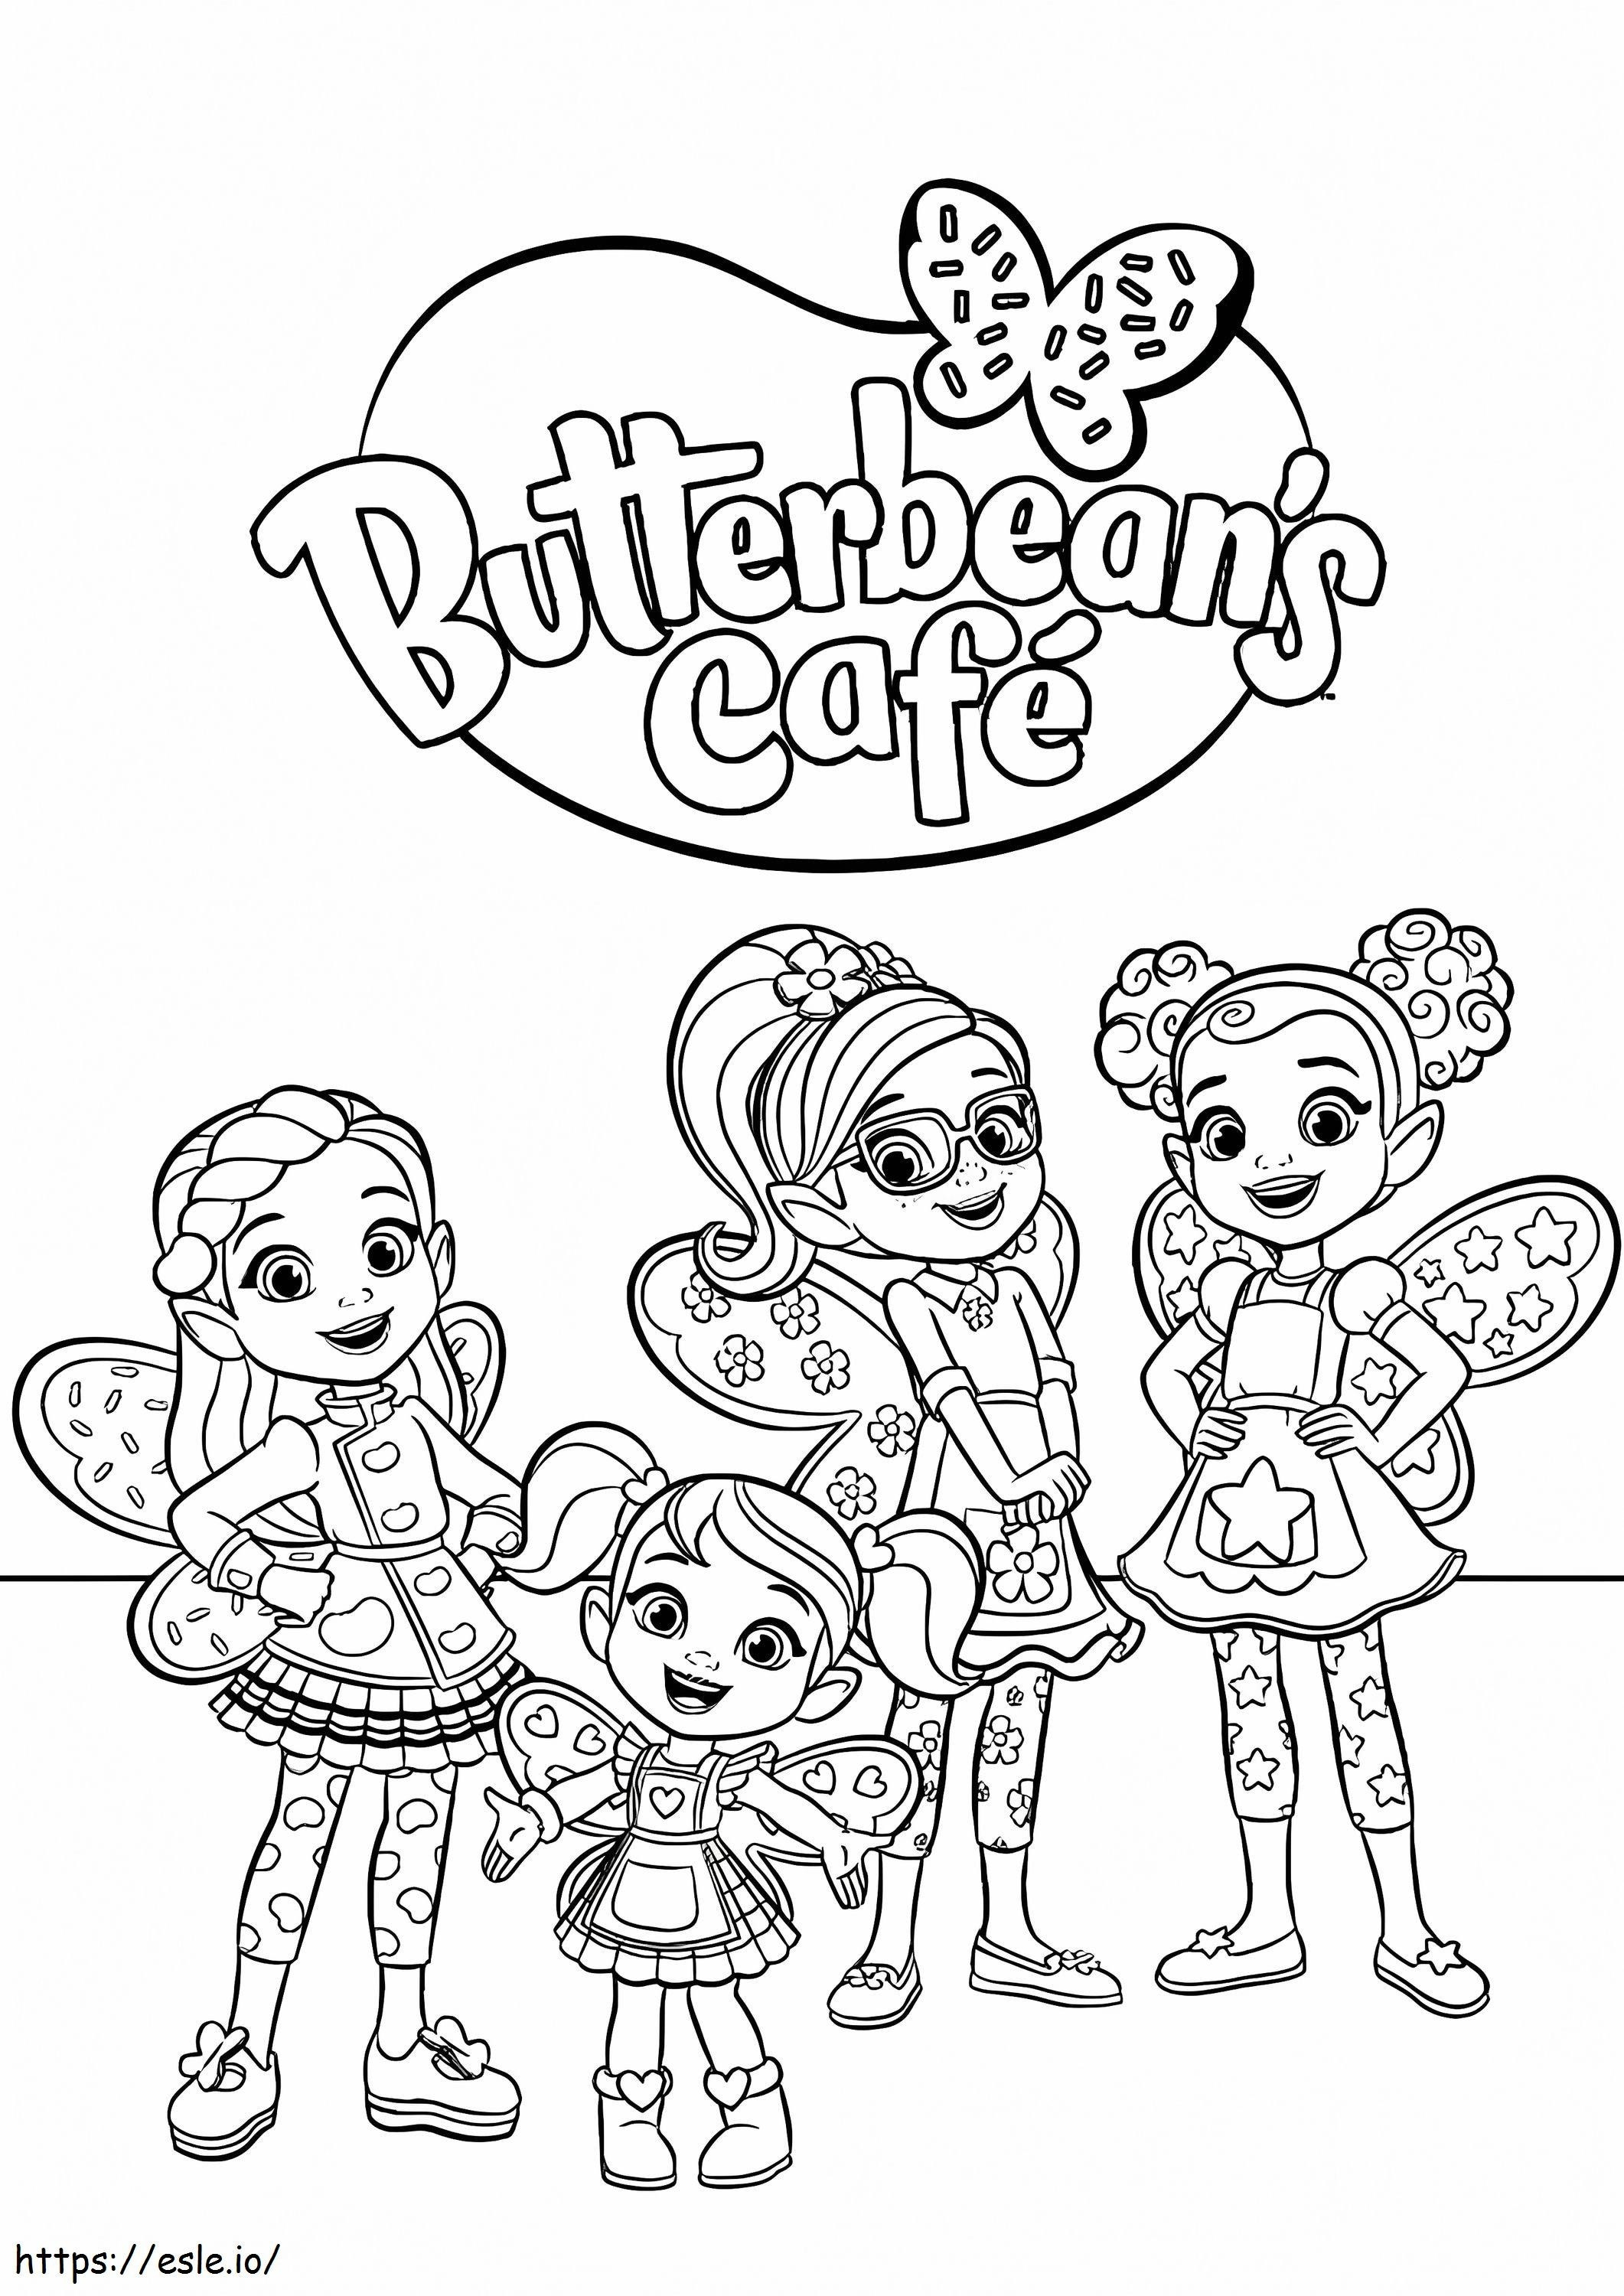 Characters From Butterbeans Cafe coloring page